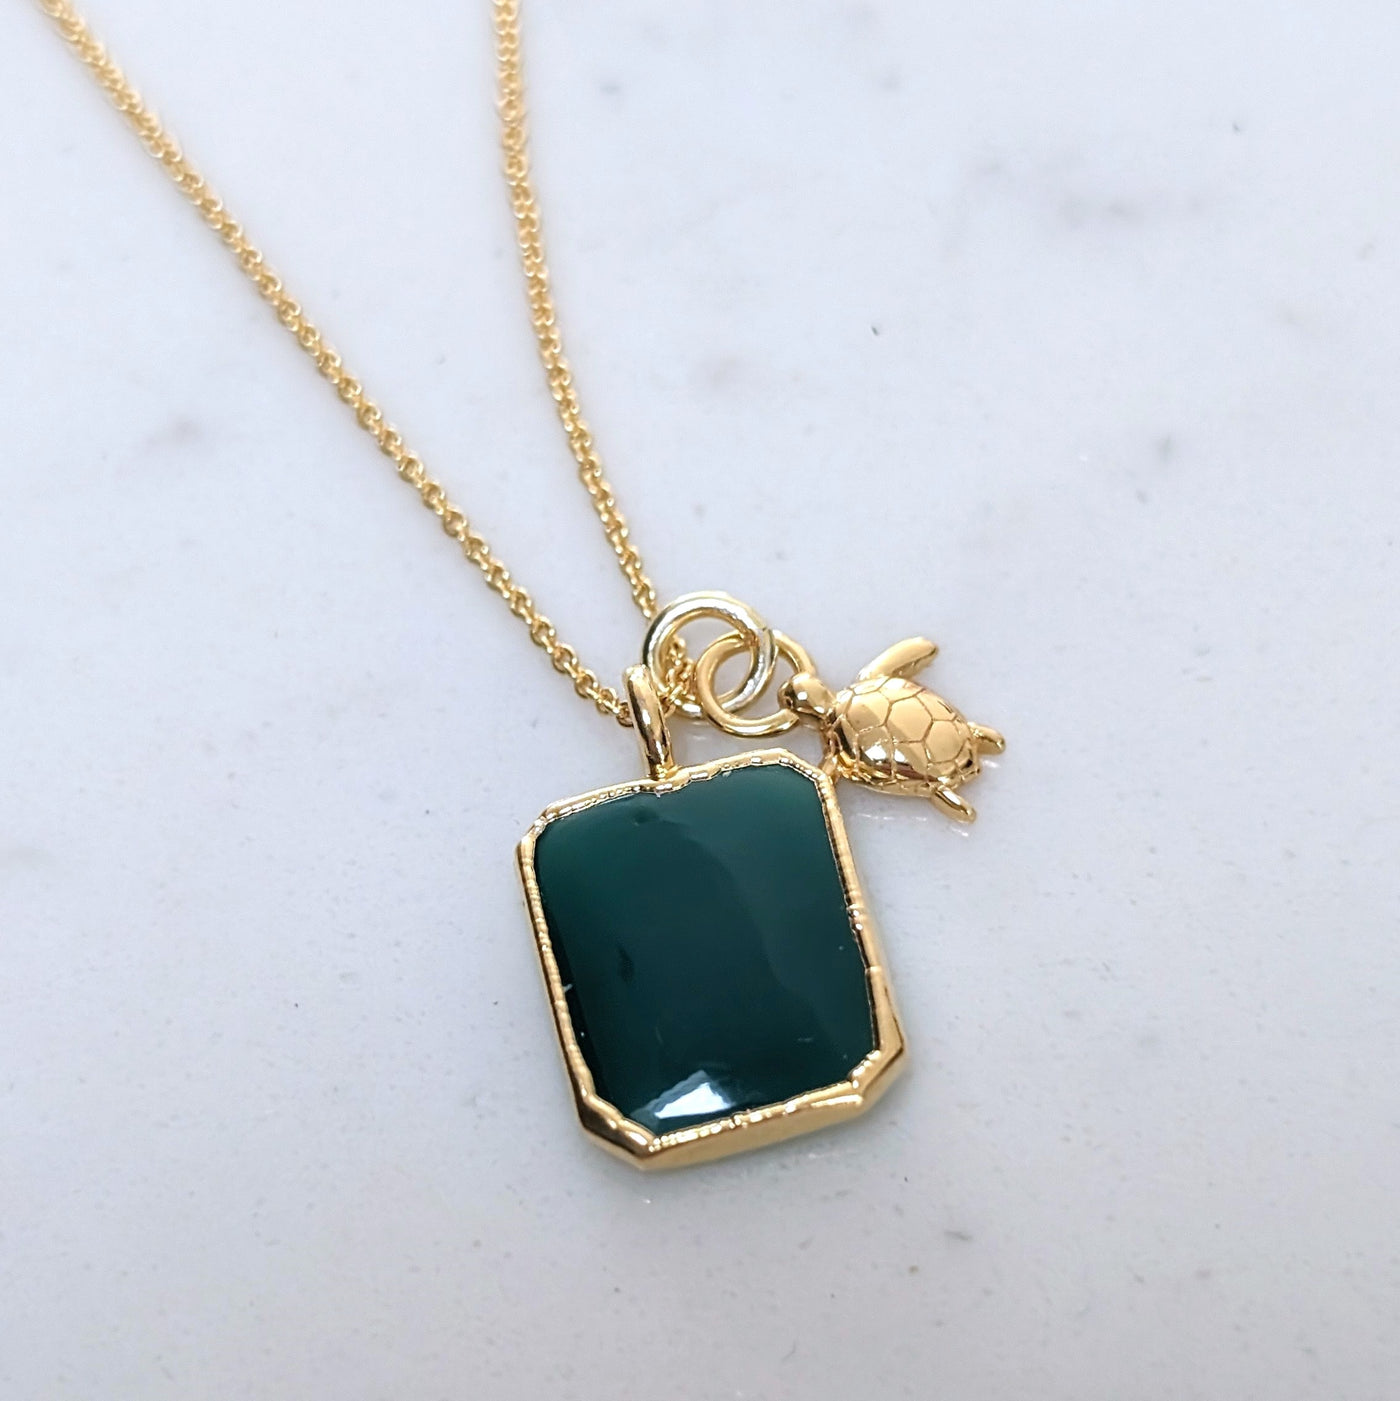 The Duo Green Onyx Necklace